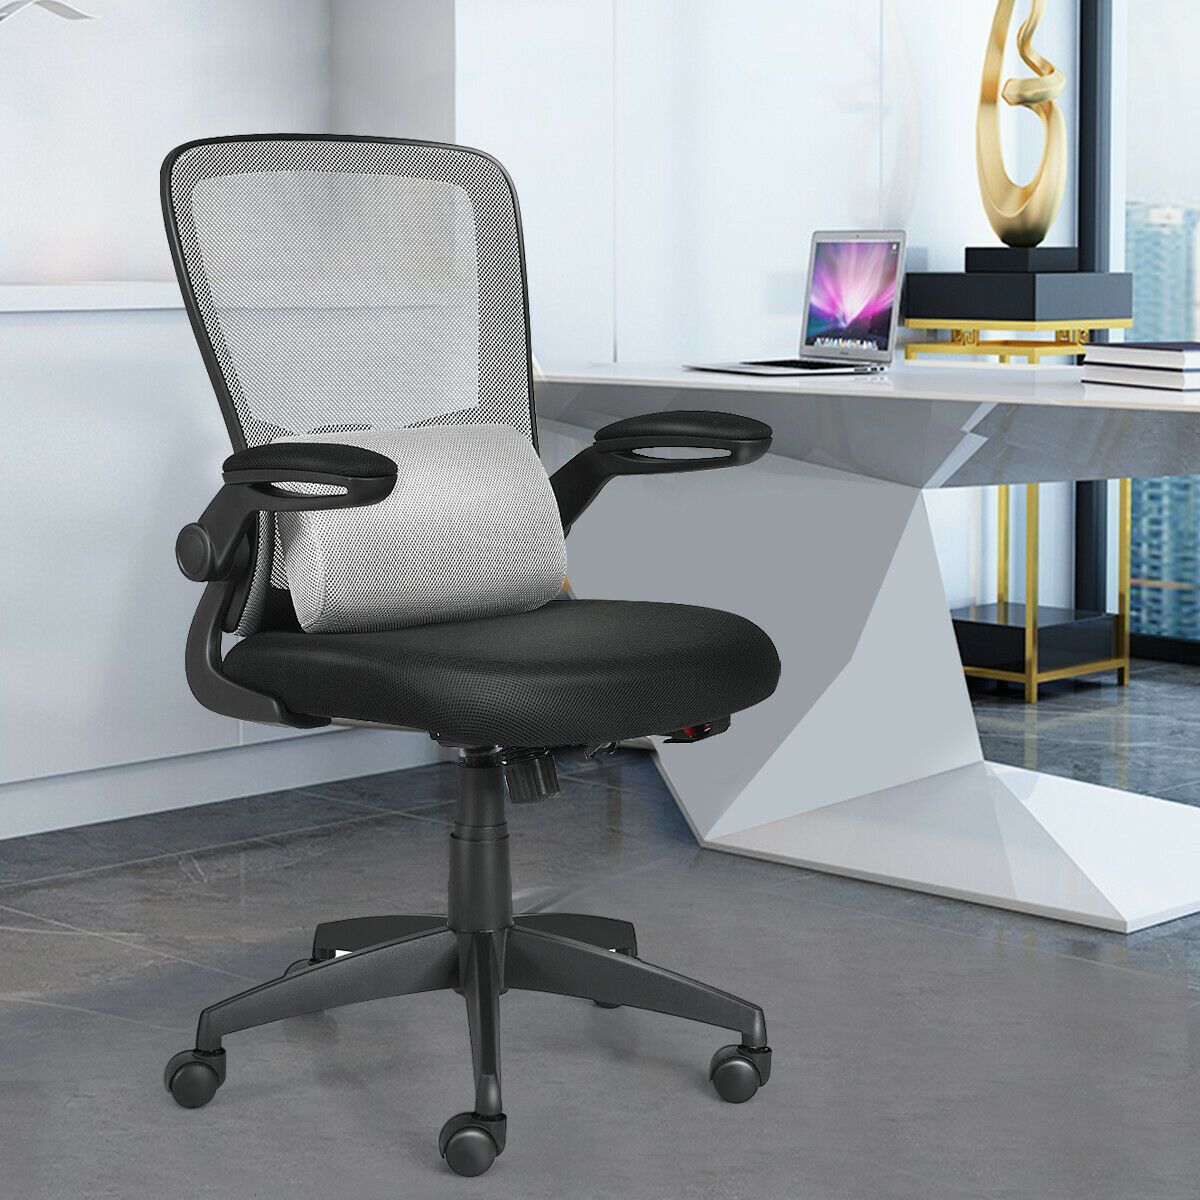 Lightweight Mesh Office Chair with Lumbar Support and Adjustable Backrest